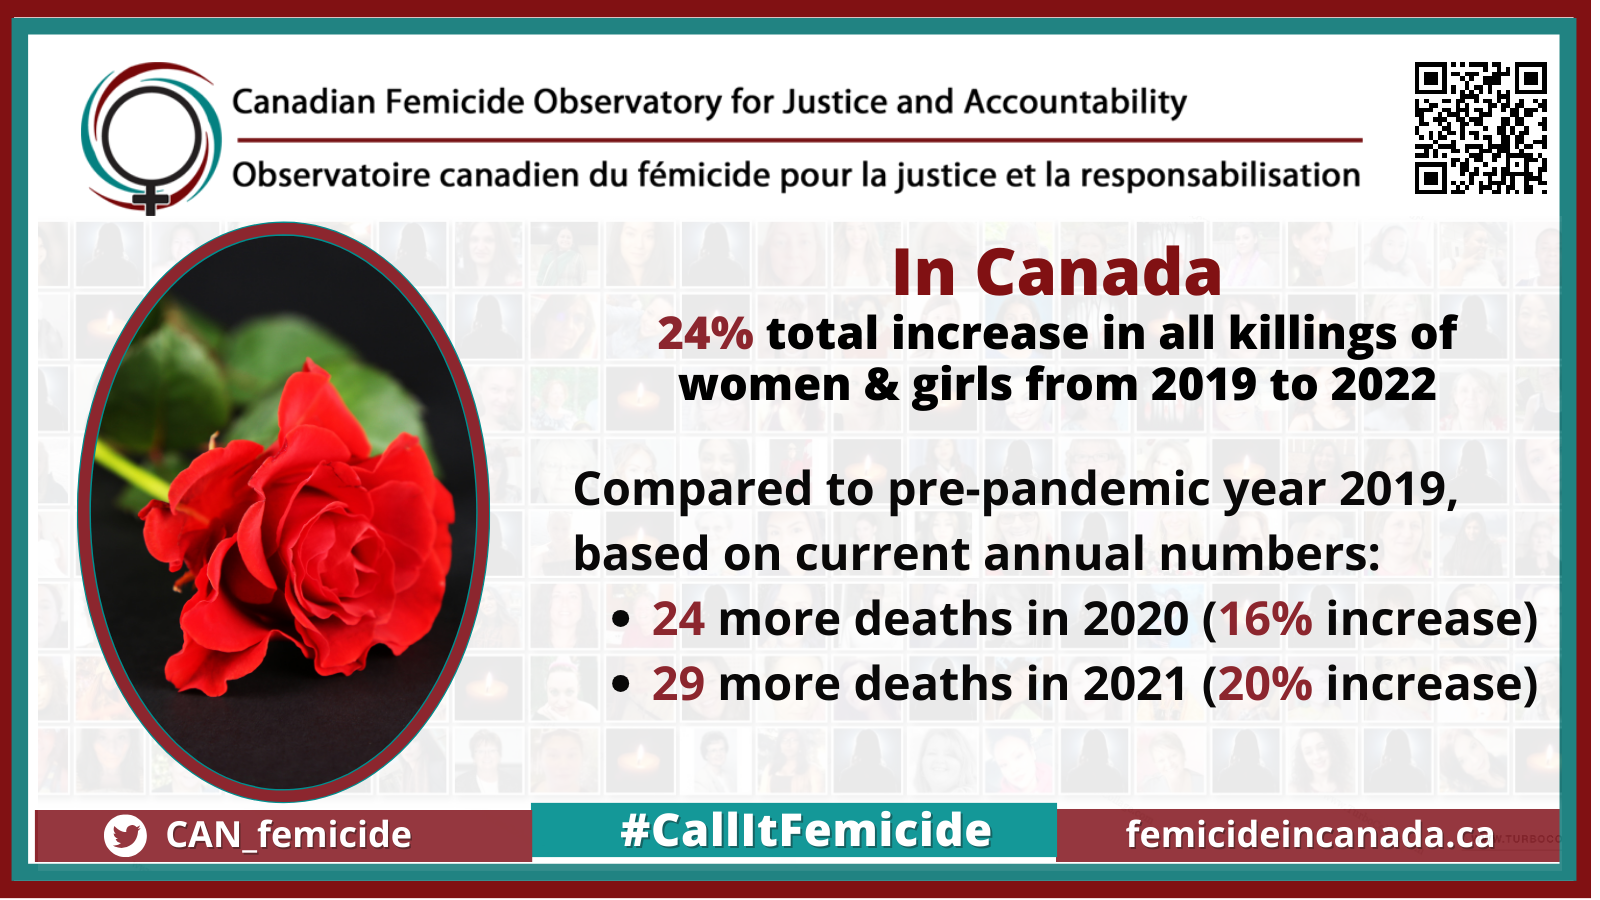 In Canada 24% total increase in all killings of women & girls from 2019 to 2022